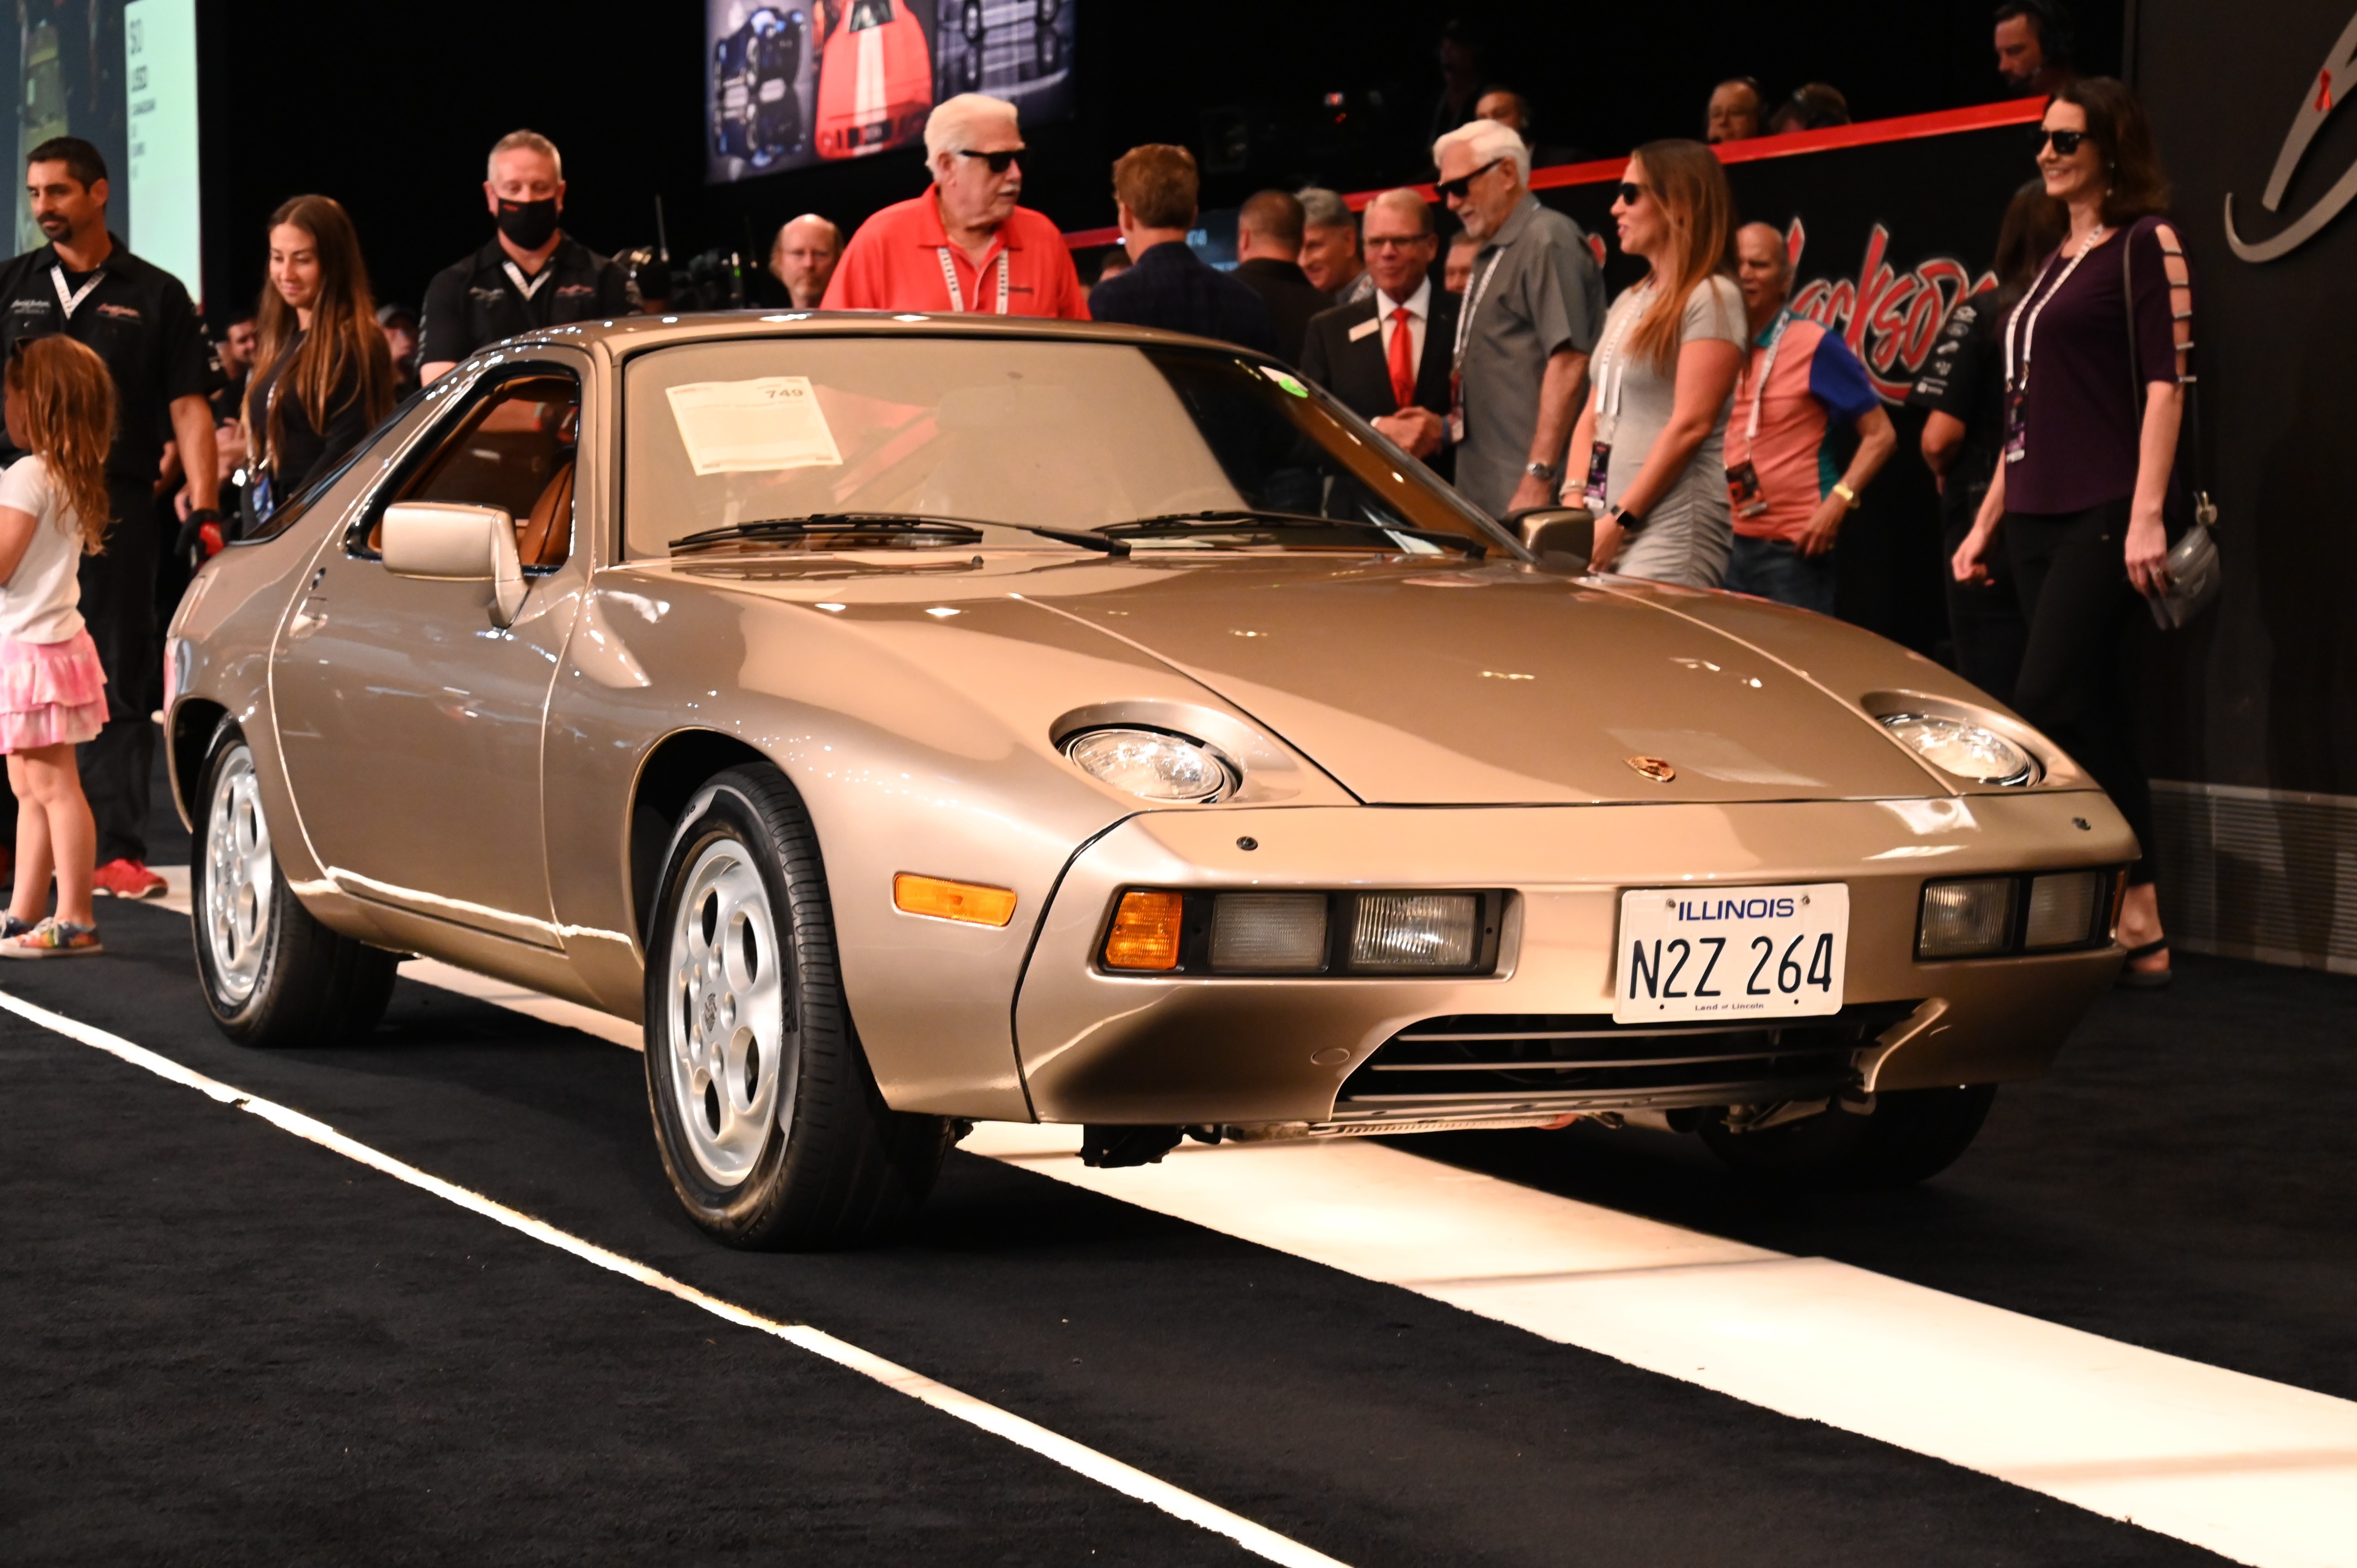 Barrett-Jackson Inaugural Houston Auction Hits $37.5 Million Fueled by $1.98 Million Sale of Porsche 928 Driven by Tom Cruise in “Risky Business” Business Wire